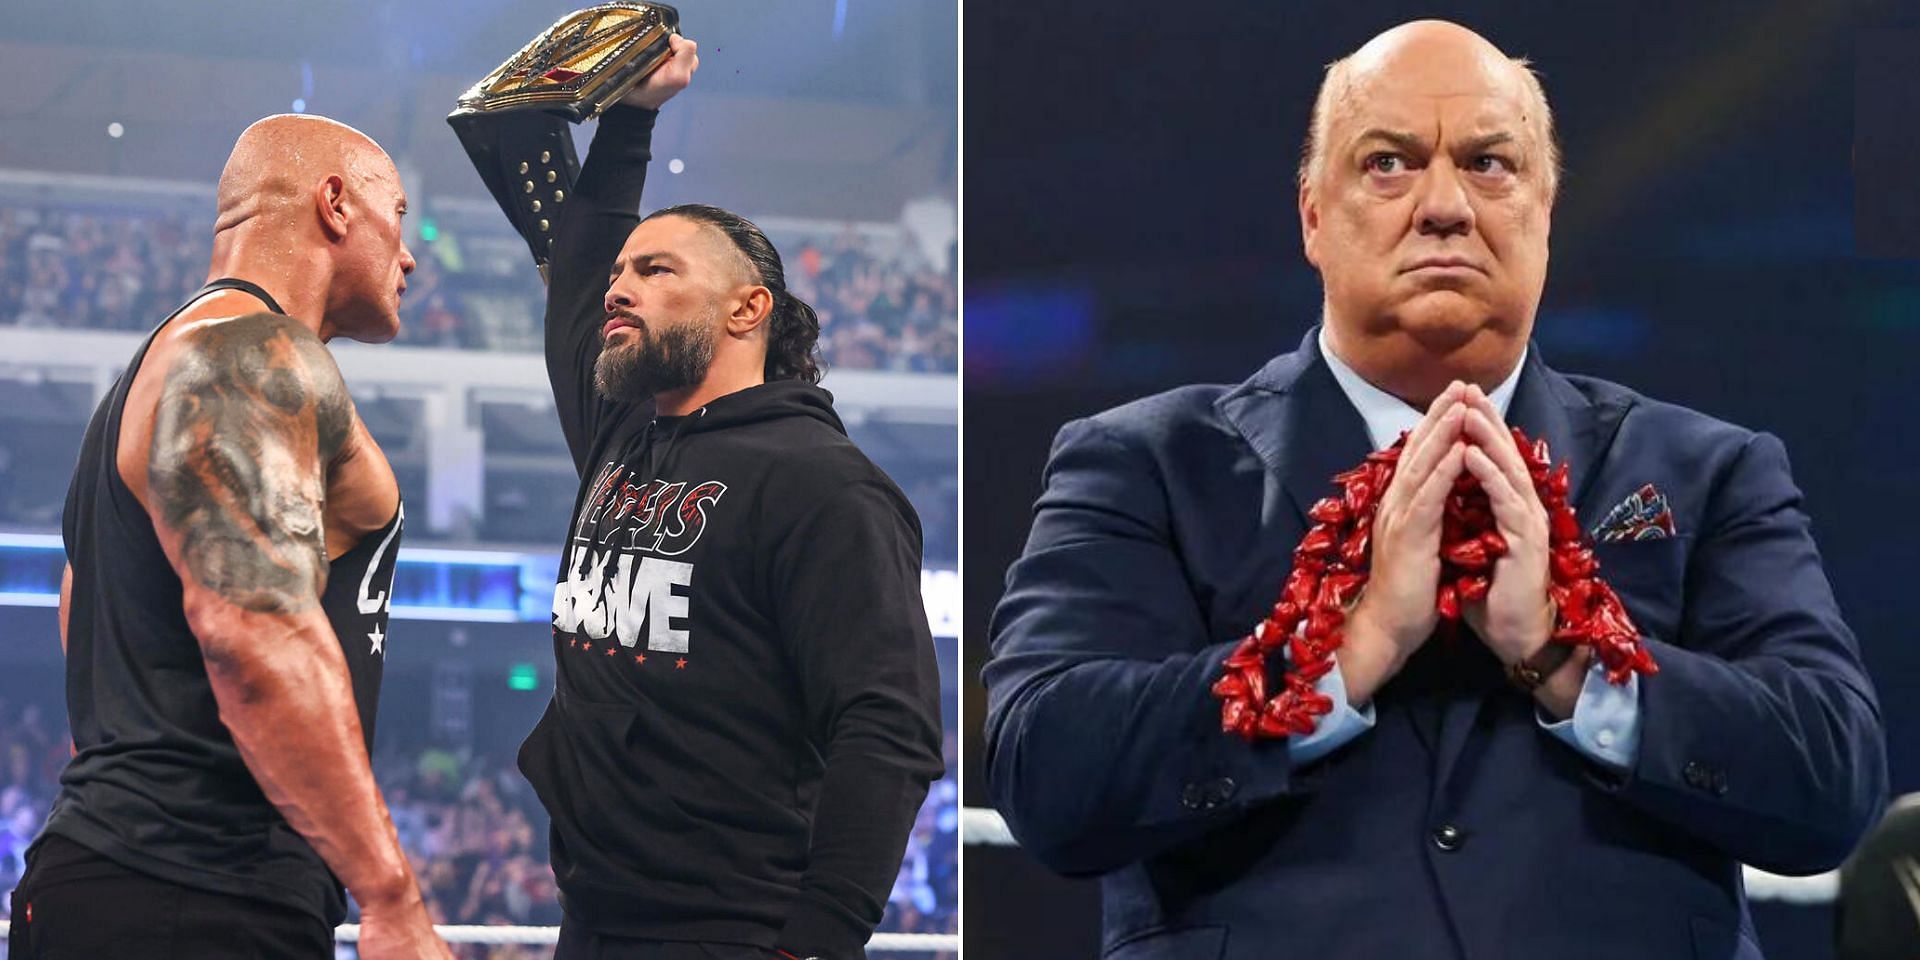 Paul Heyman, The Rock and Roman Reigns will be part of the event